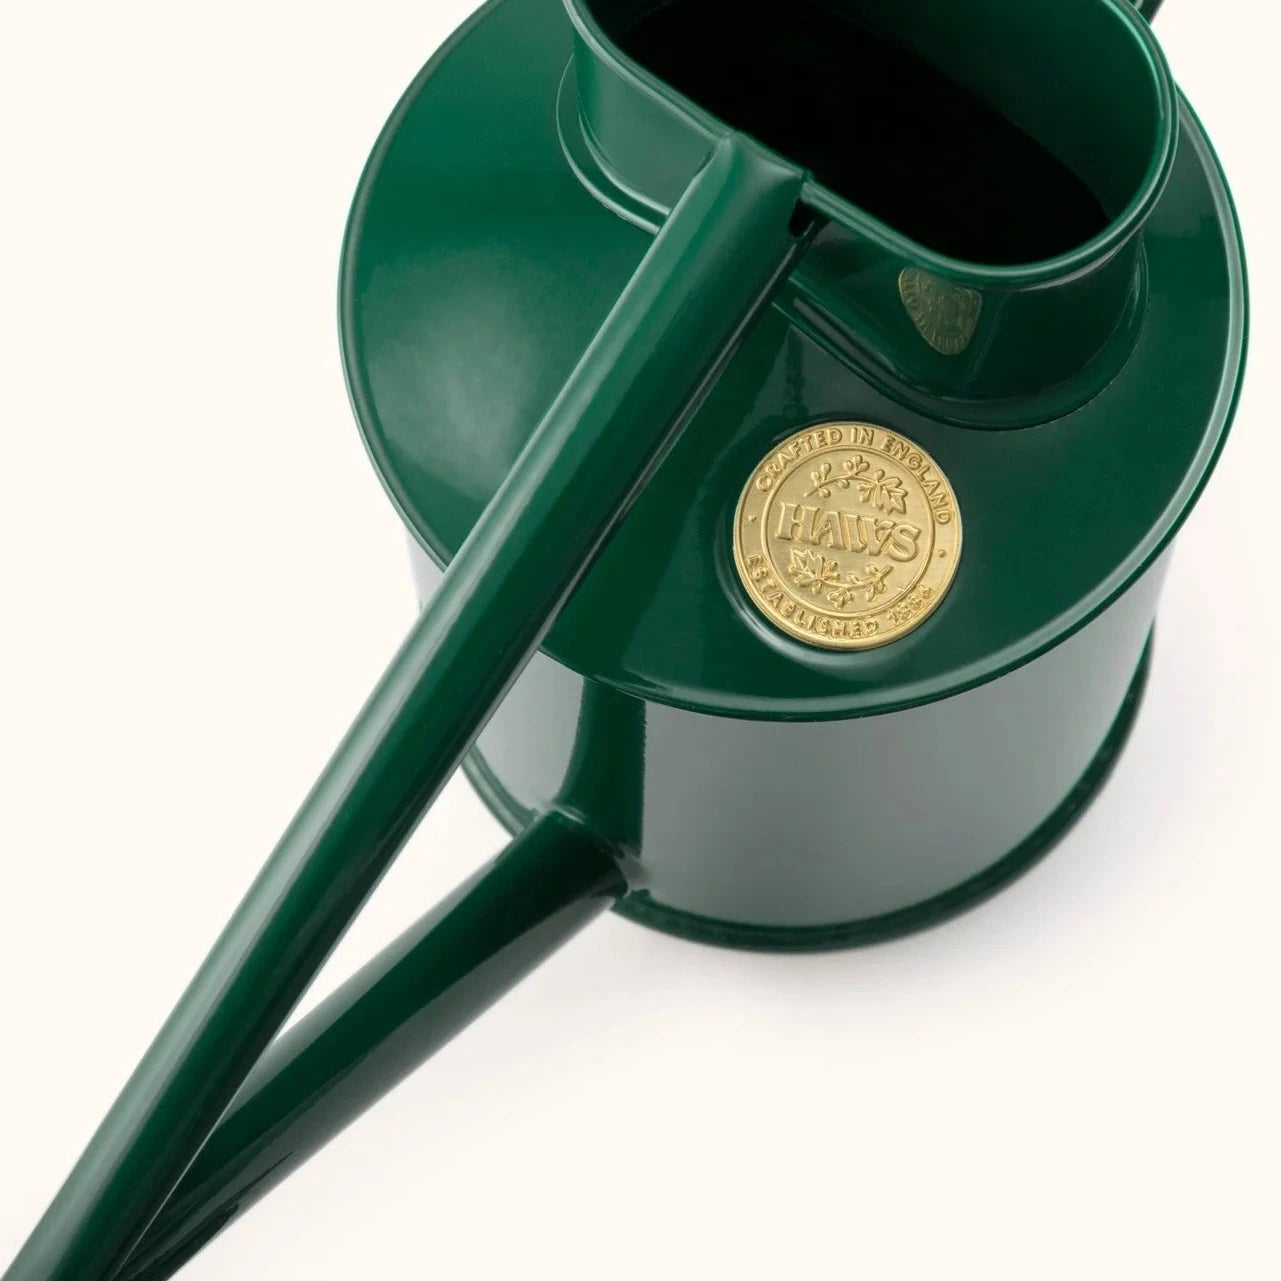 Haws Rolwley Ripple Metal Two Pint Watering Can in British Green top view of the product